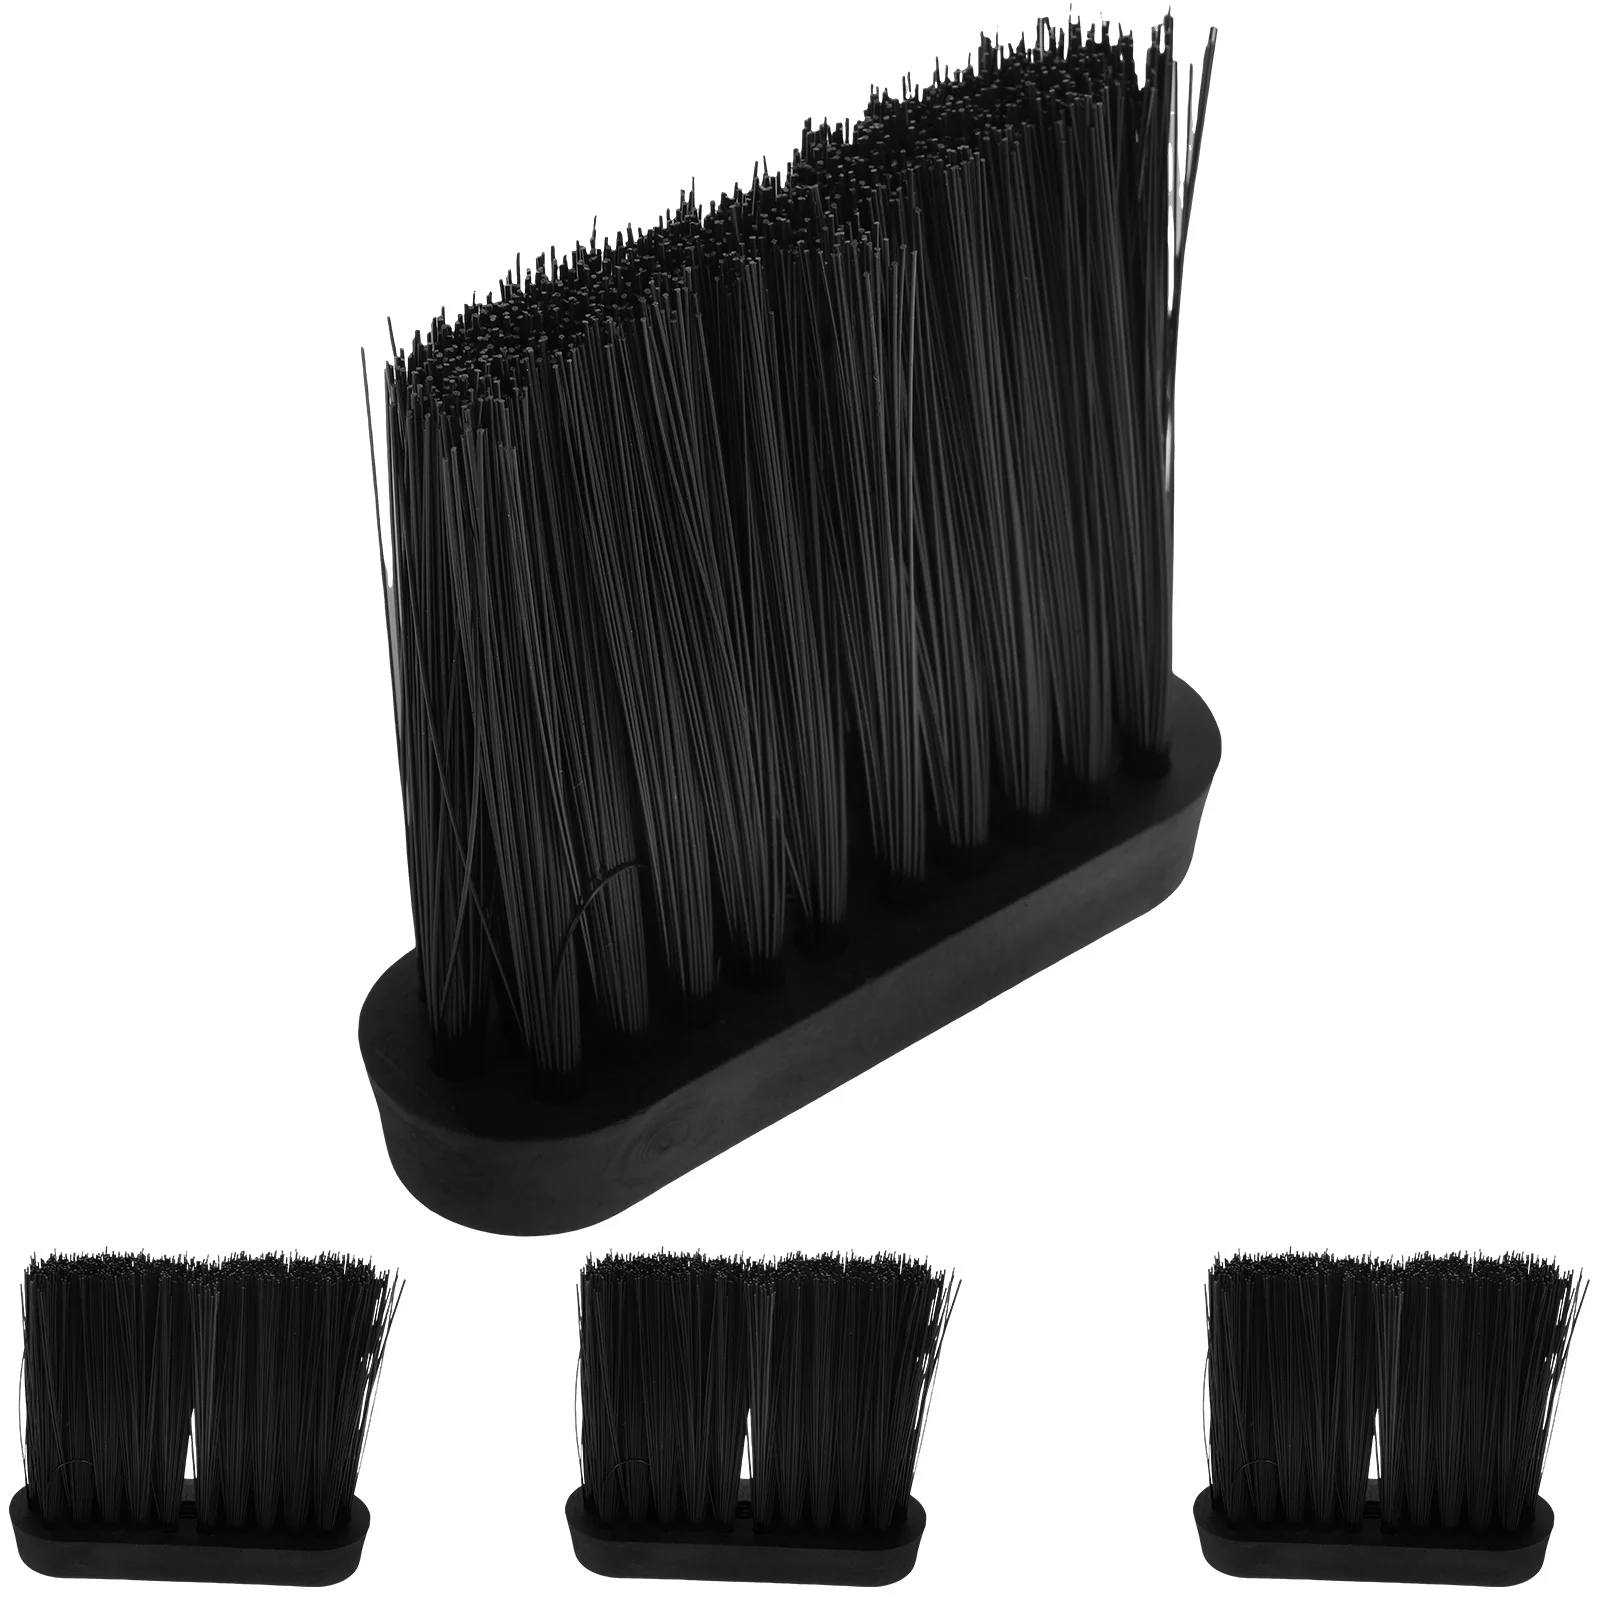 

4pcs Fireplace Cleaning Brushes Fireplace Brush Heads Fireplace Cleaning Supplies